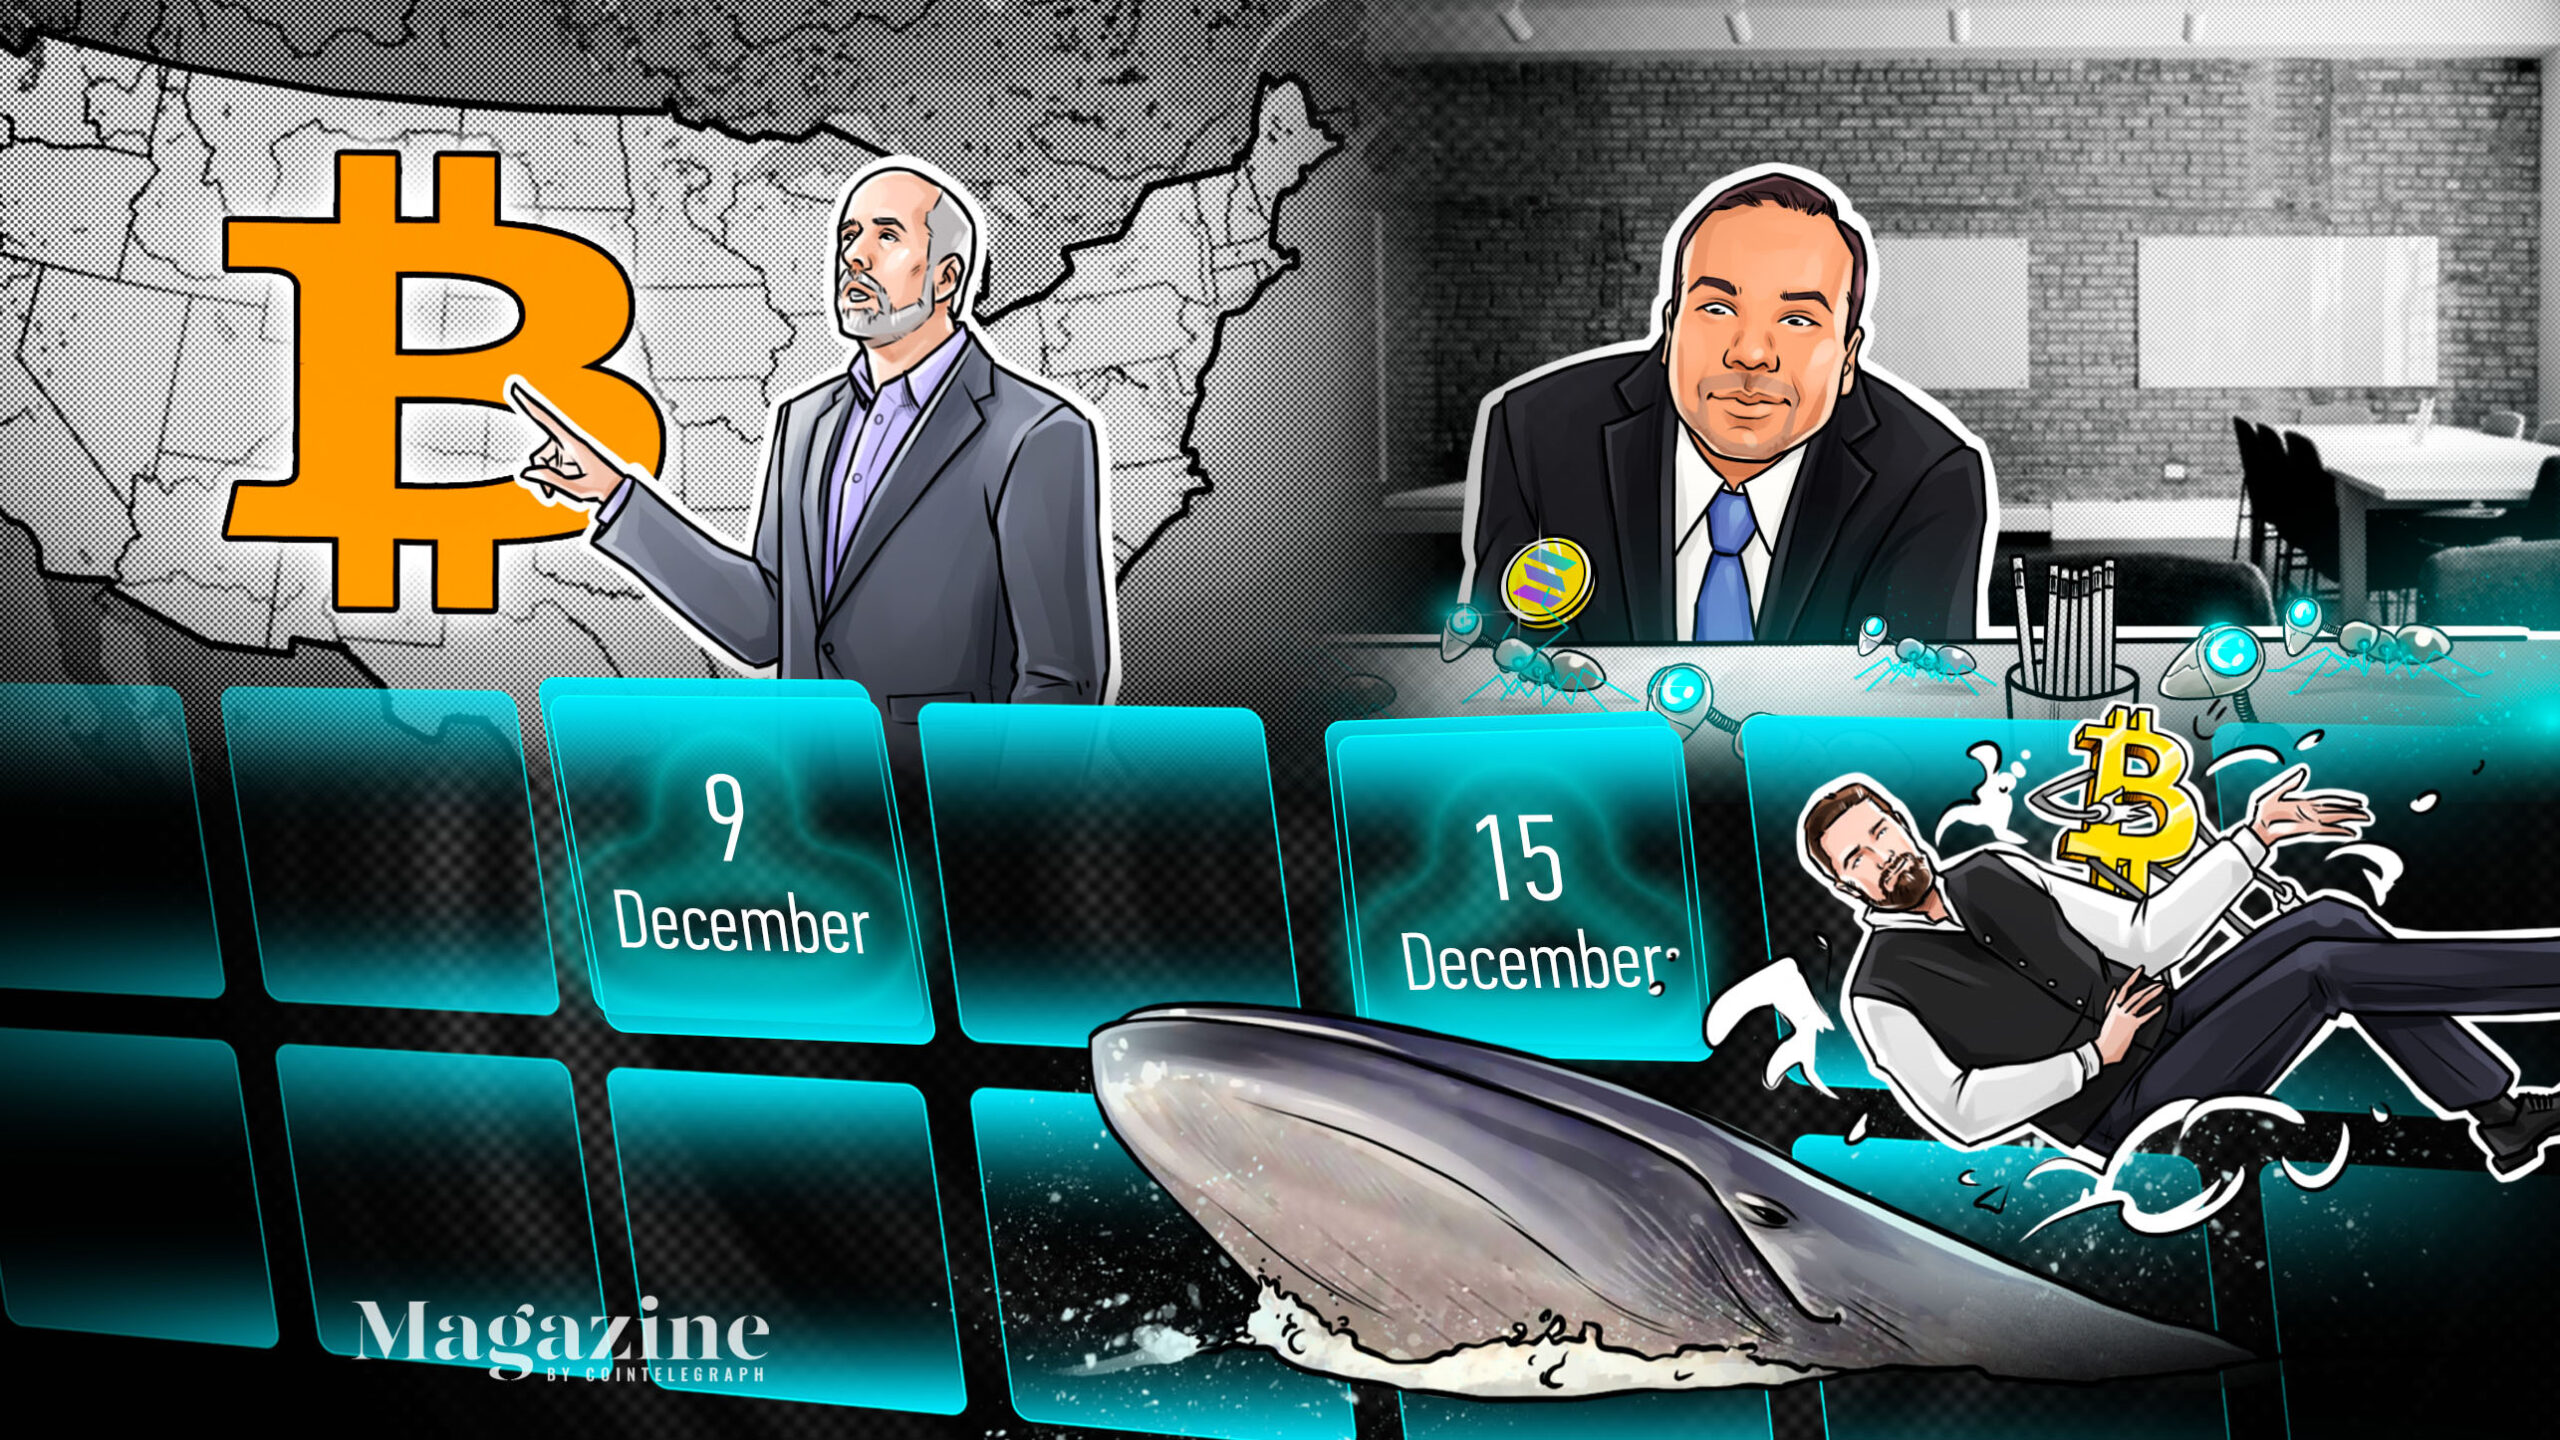 Binance-ceo’s-net-worth-hits-$96b,-jack-dorsey-launches-btc-defense-fund,-bill-miller-apes-into-bitcoin:-hodler’s-digest,-jan.-9-15